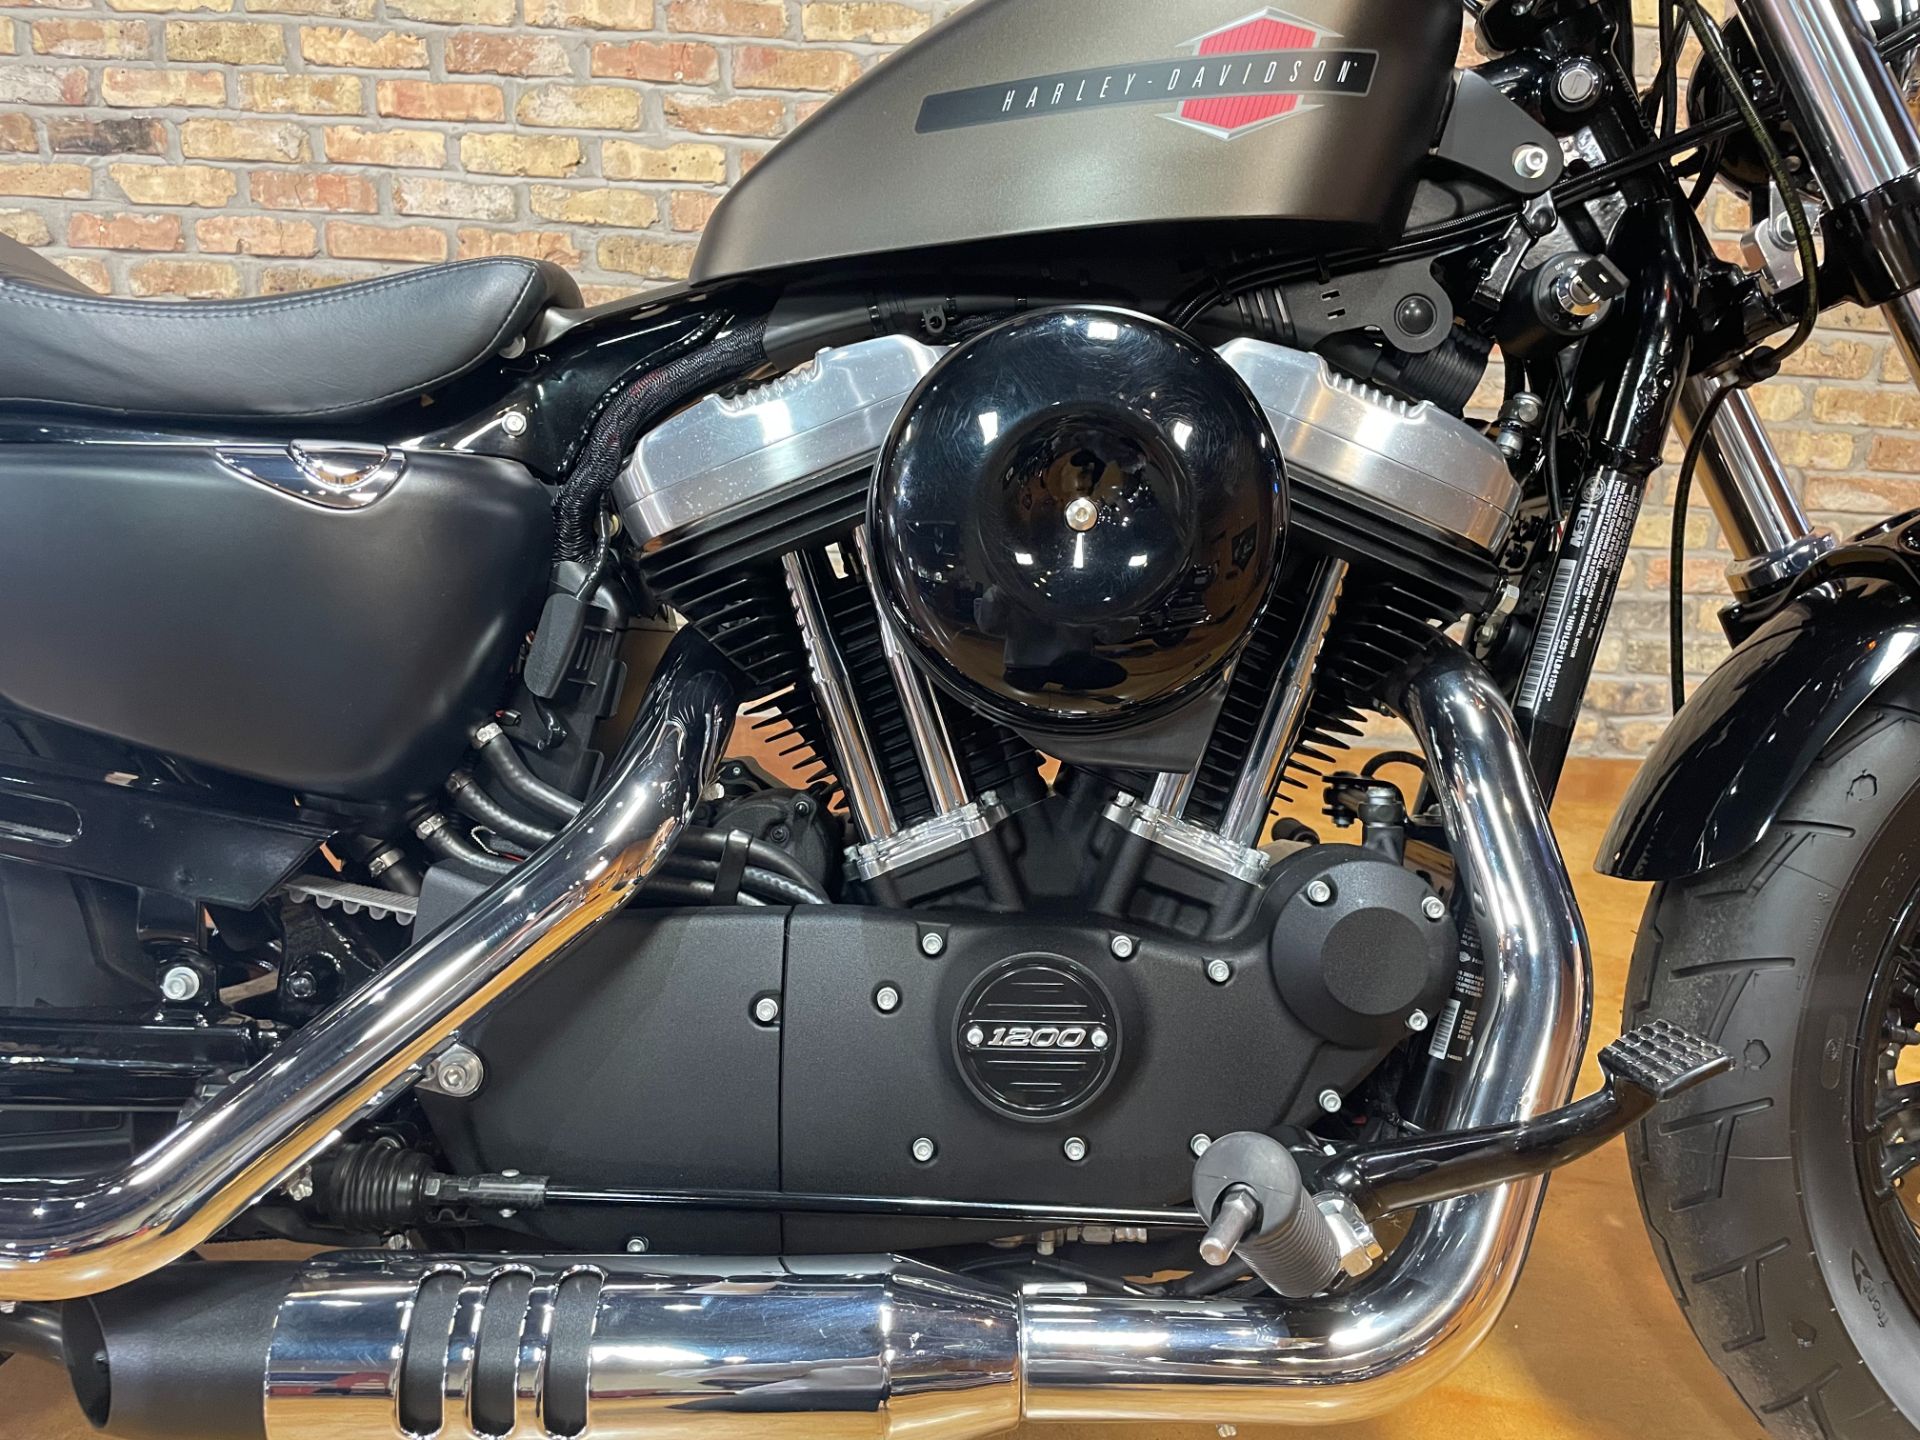 2020 Harley-Davidson Forty-Eight® in Big Bend, Wisconsin - Photo 10